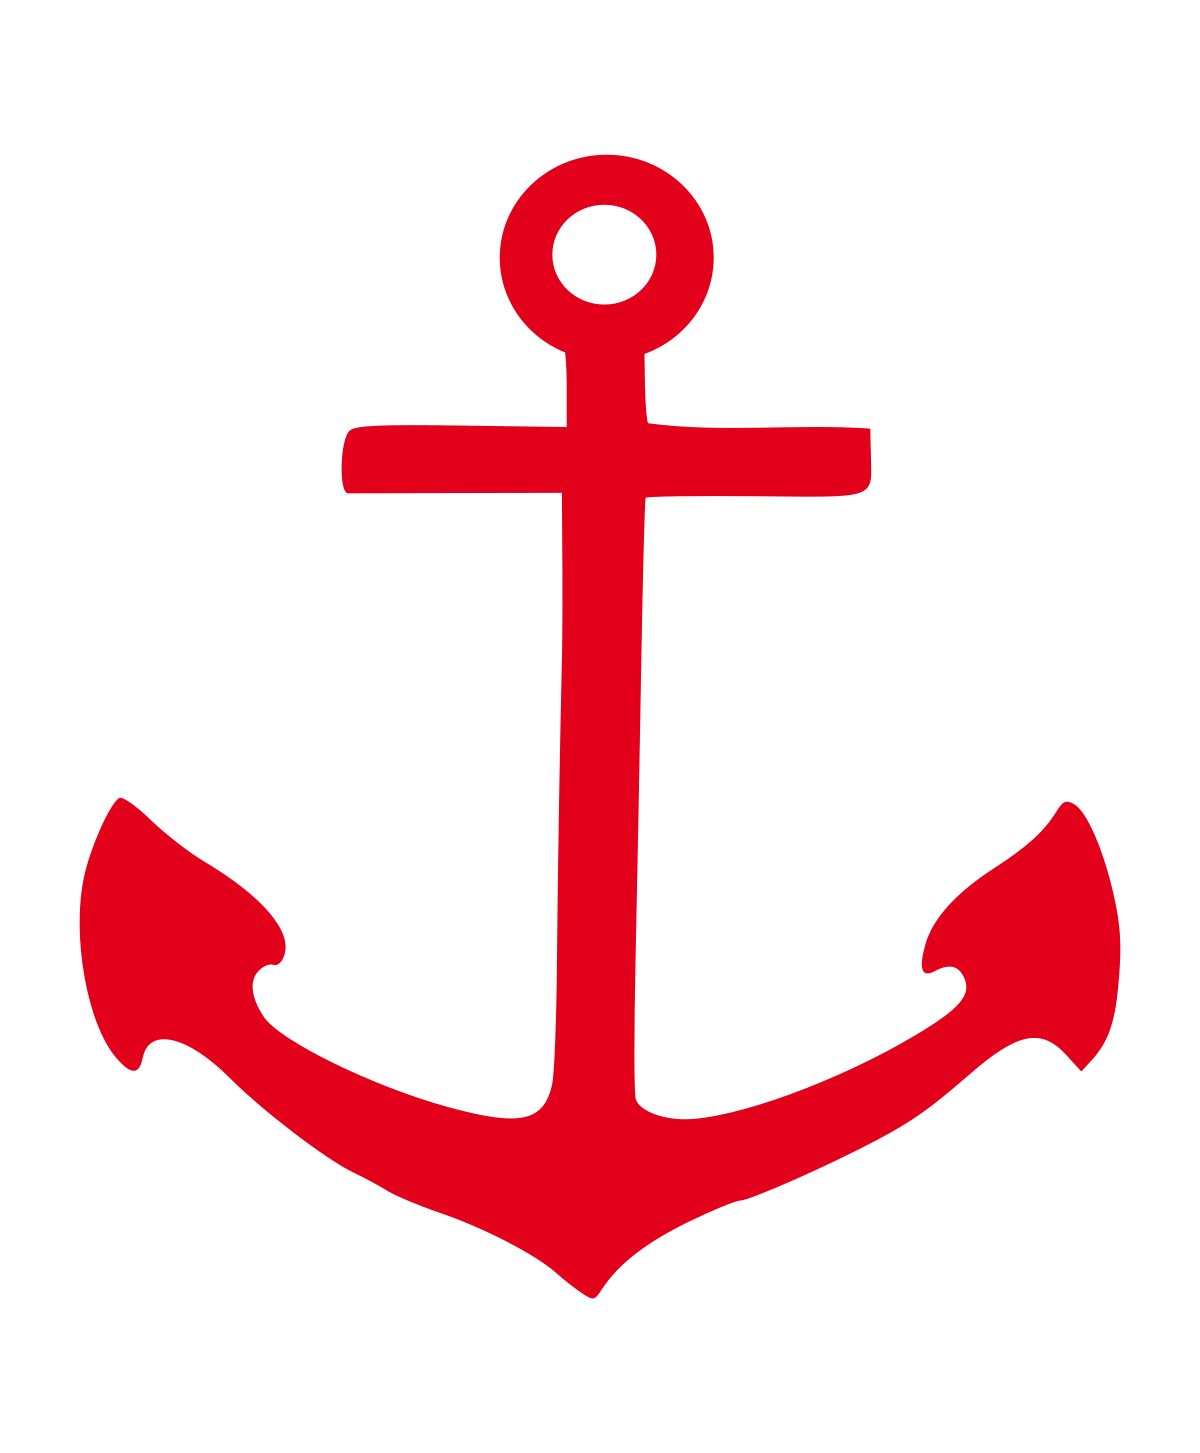 File:Anchor pictogram red.svg - Wikipedia